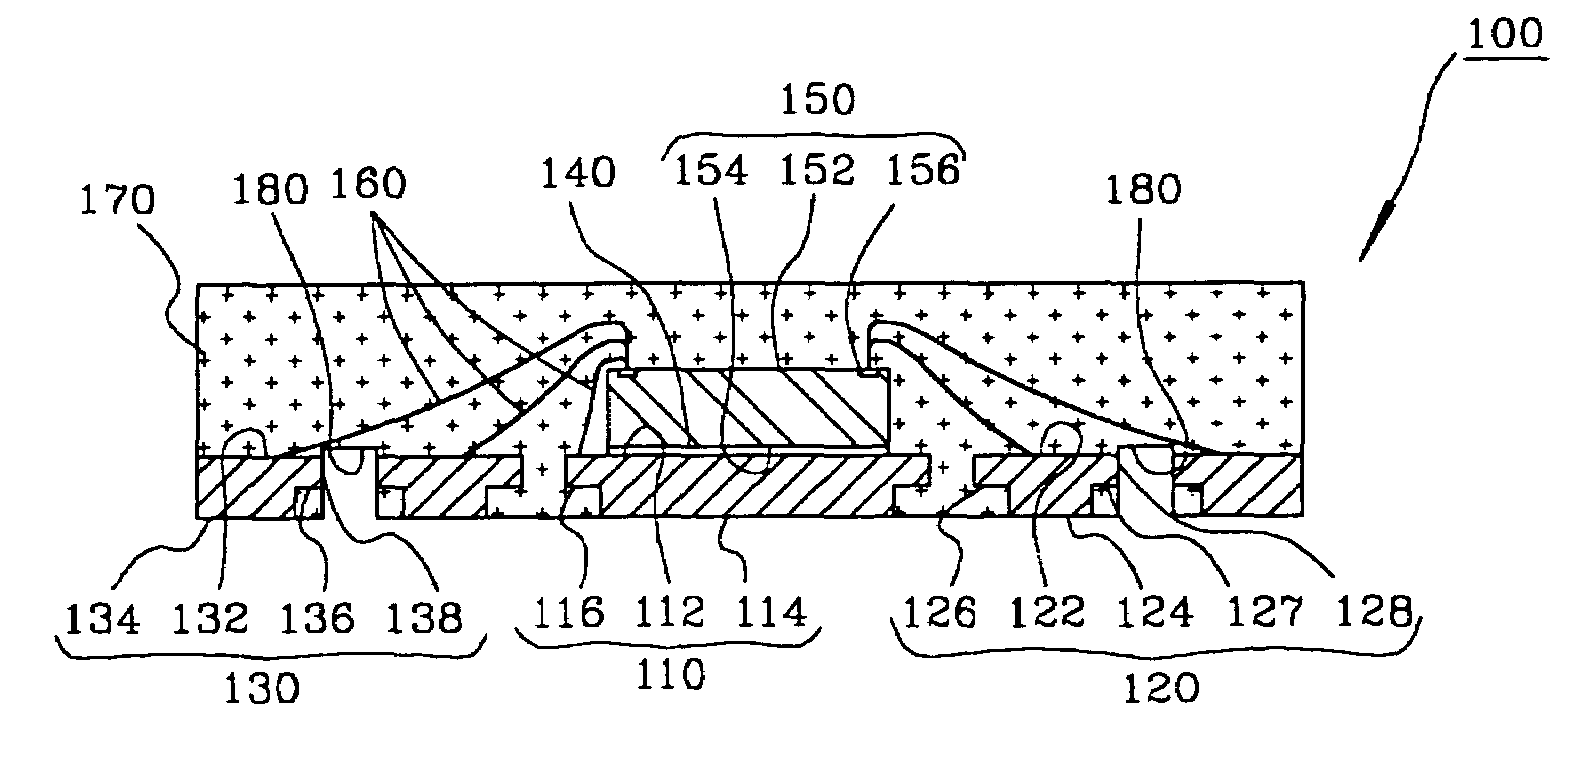 Semiconductor package exhibiting efficient lead placement